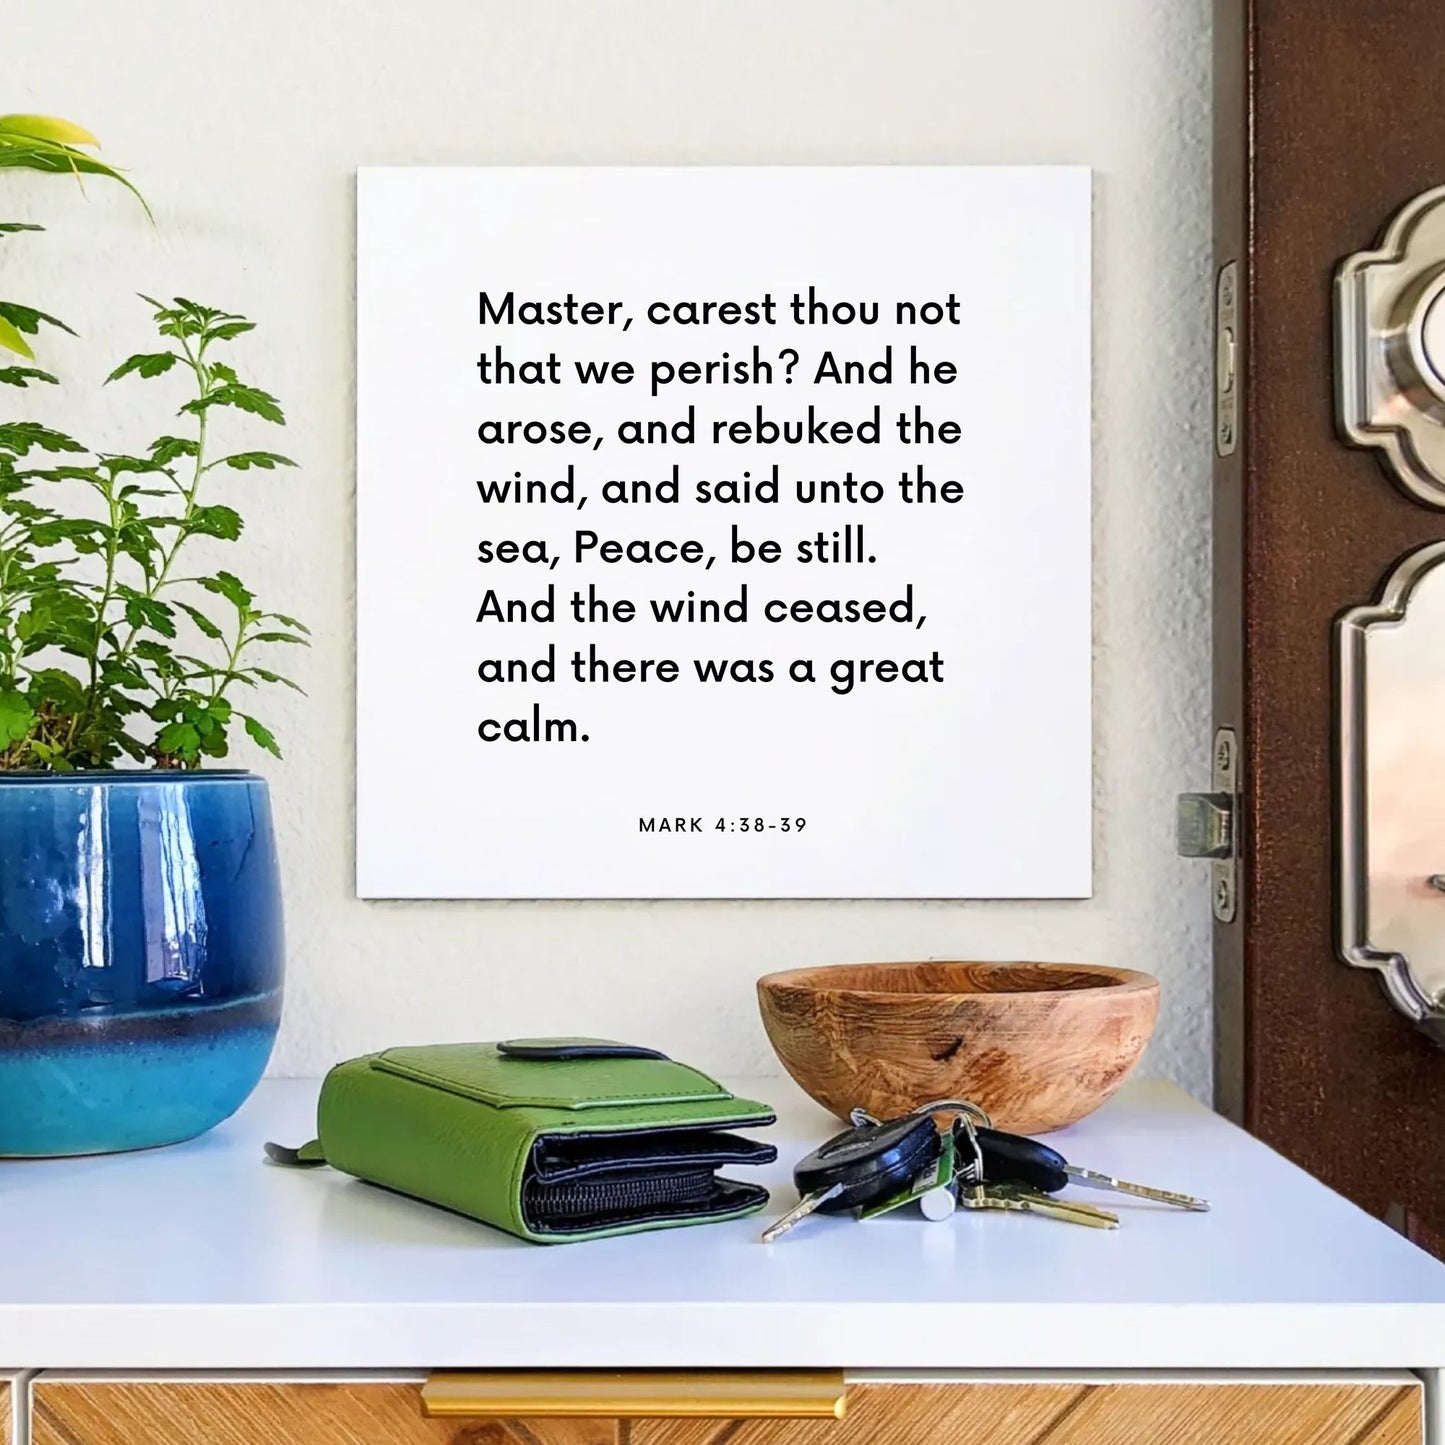 Entryway mouting of the scripture tile for Mark 4:38-39 - "Master, carest thou not that we perish?"